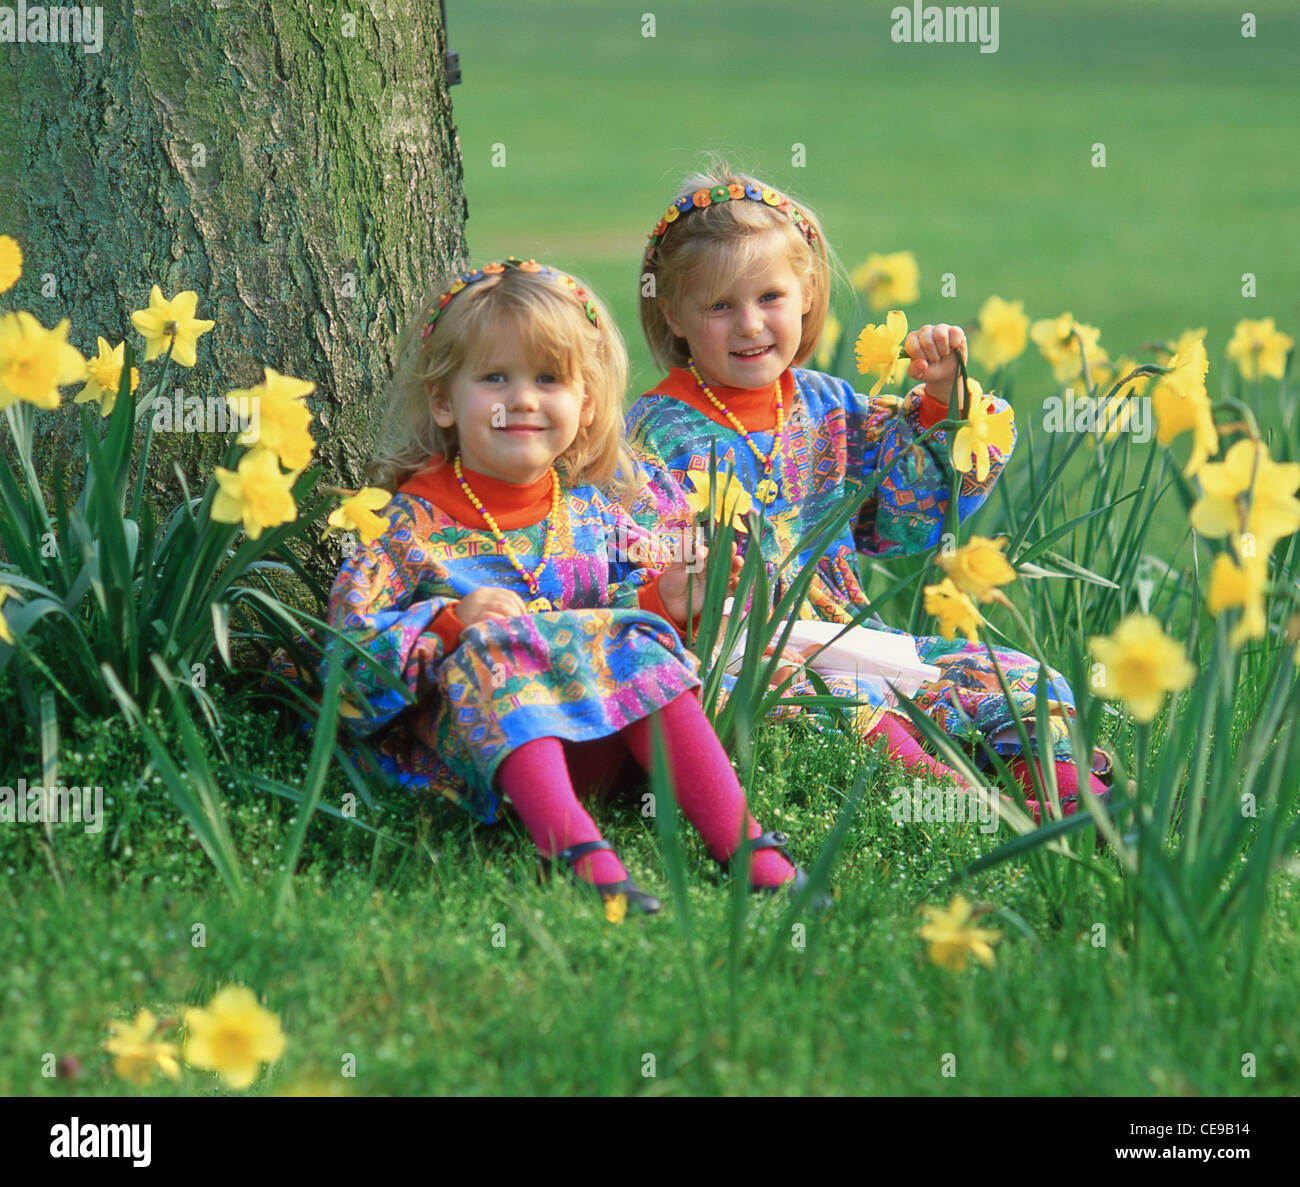 Young girls sitting in field of daffodils in spring, Berkshire, England, United Kingdom Stock Photo